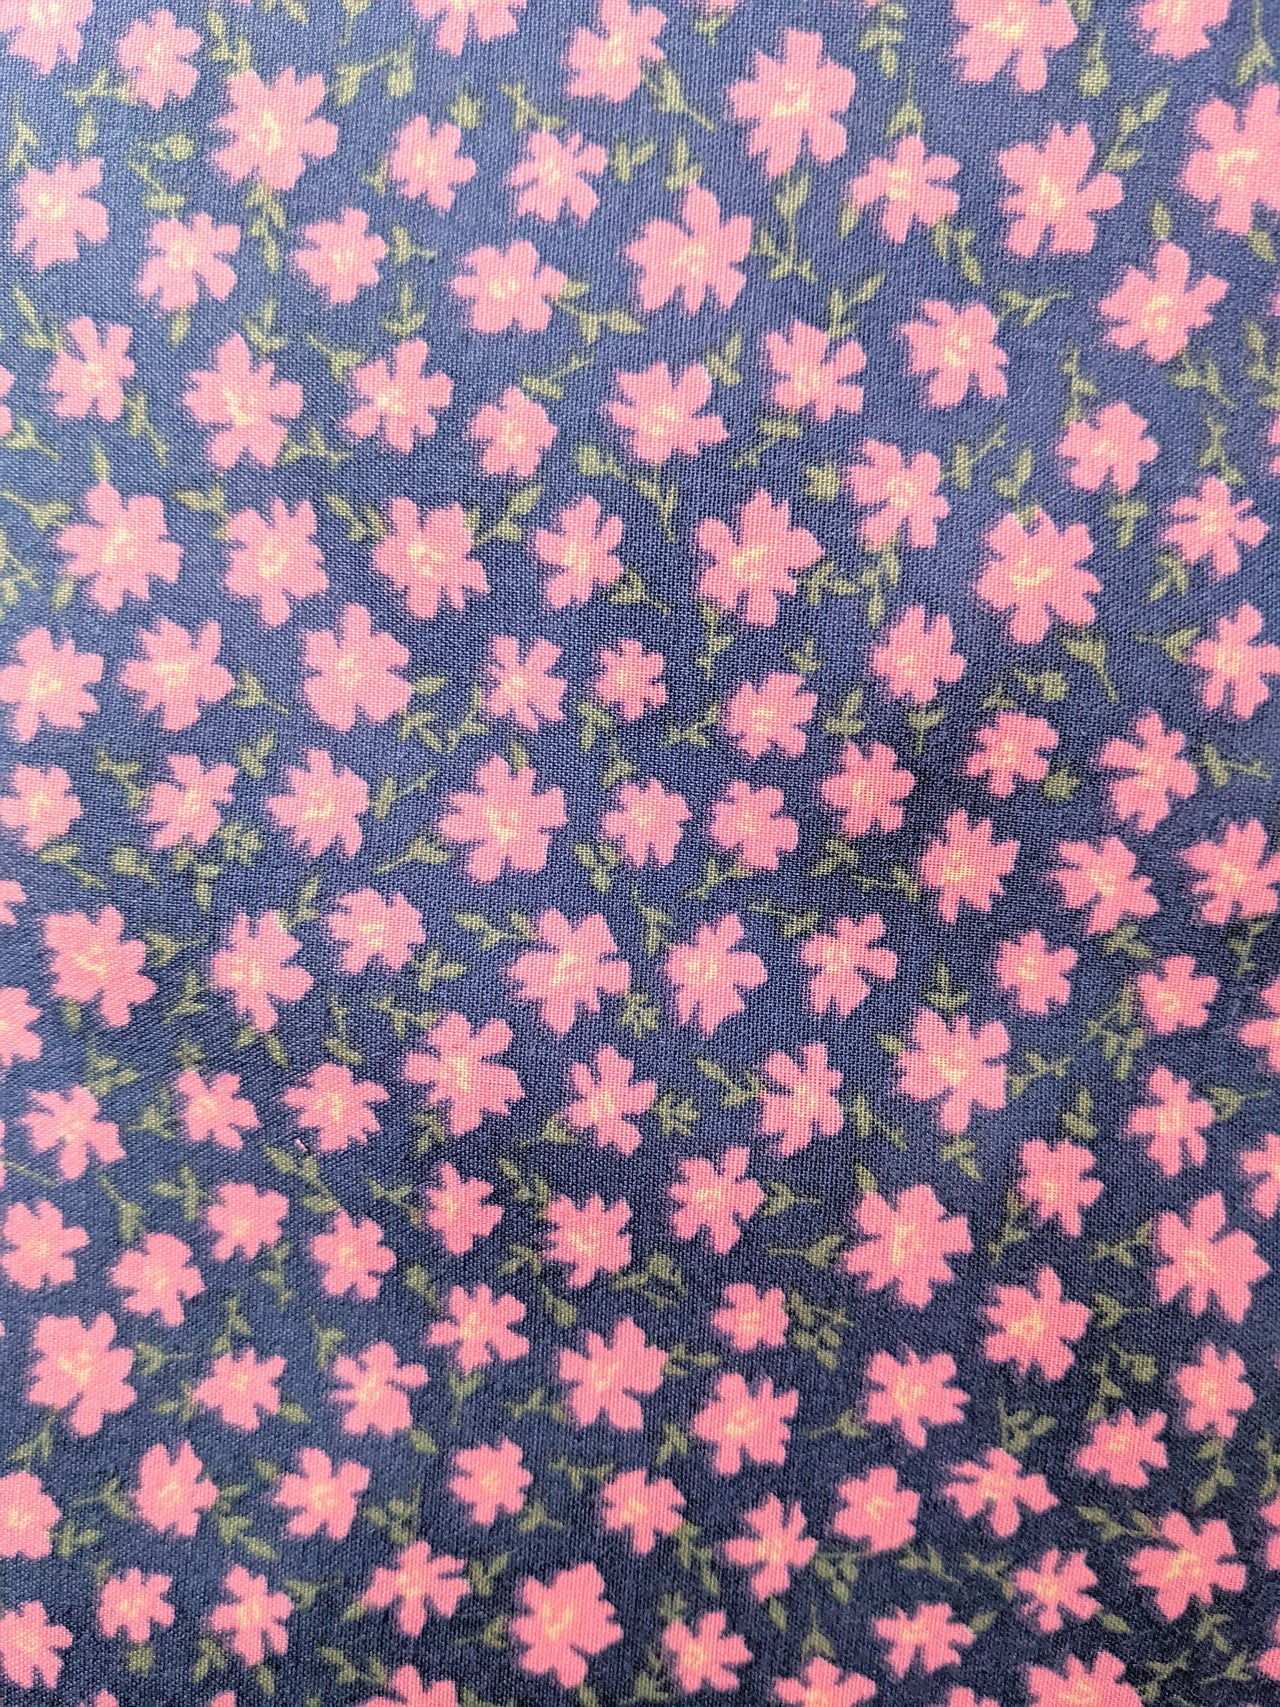 Blue Poly Cotton Fabric, Pink Flower Garden Fabric, Floral Fabric